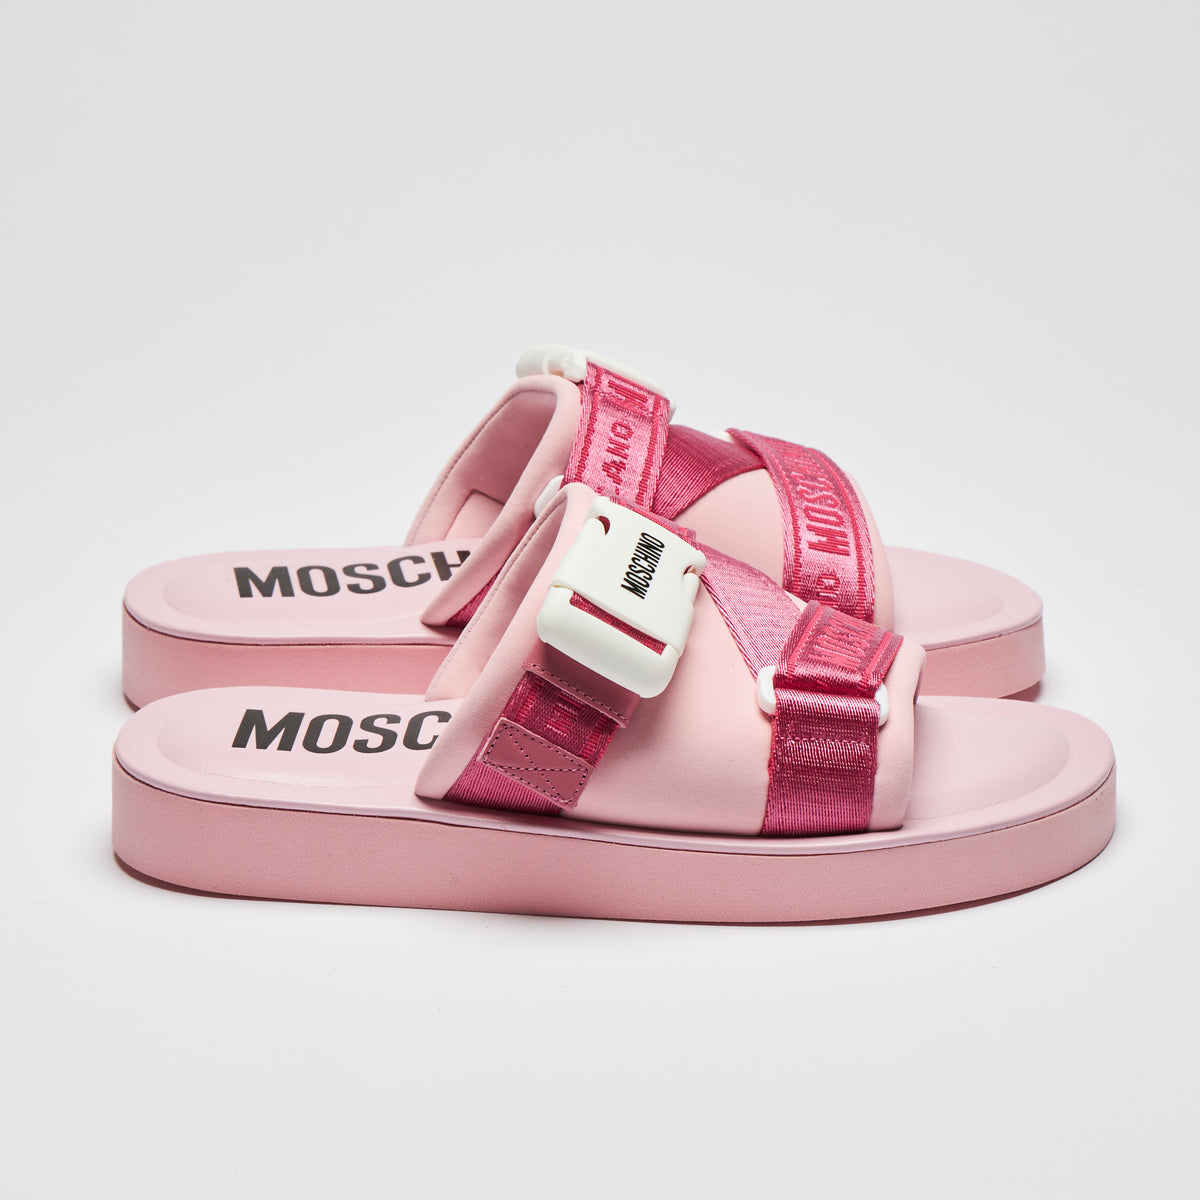 Excellent Pre-Loved Pink Slides with White Buckle Detail and Pink Ribbon Logo Strap.(side)